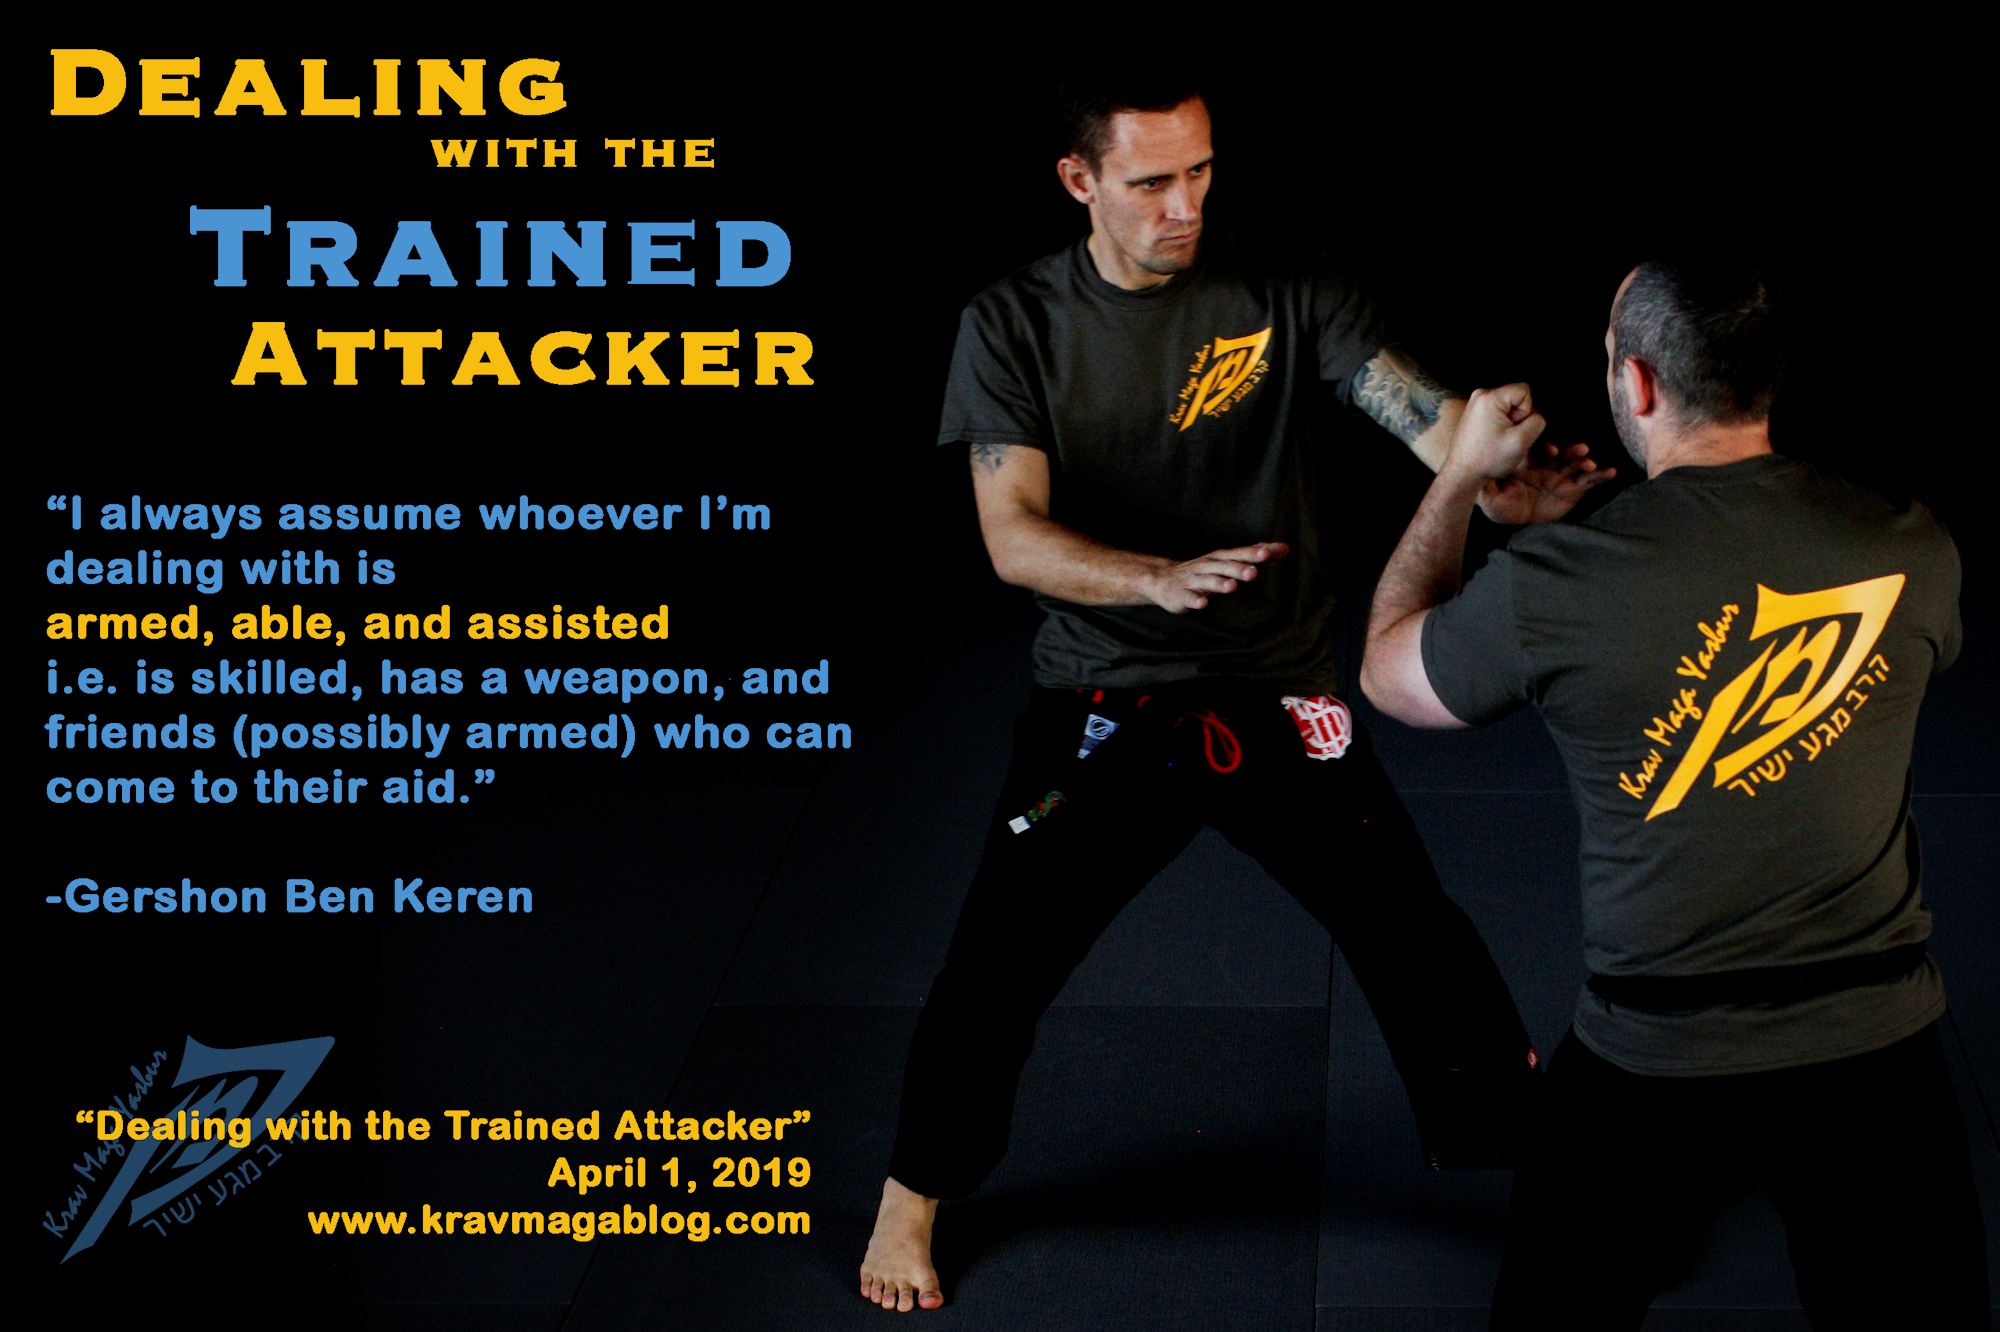 Blog About Dealing with the Trained Attacker